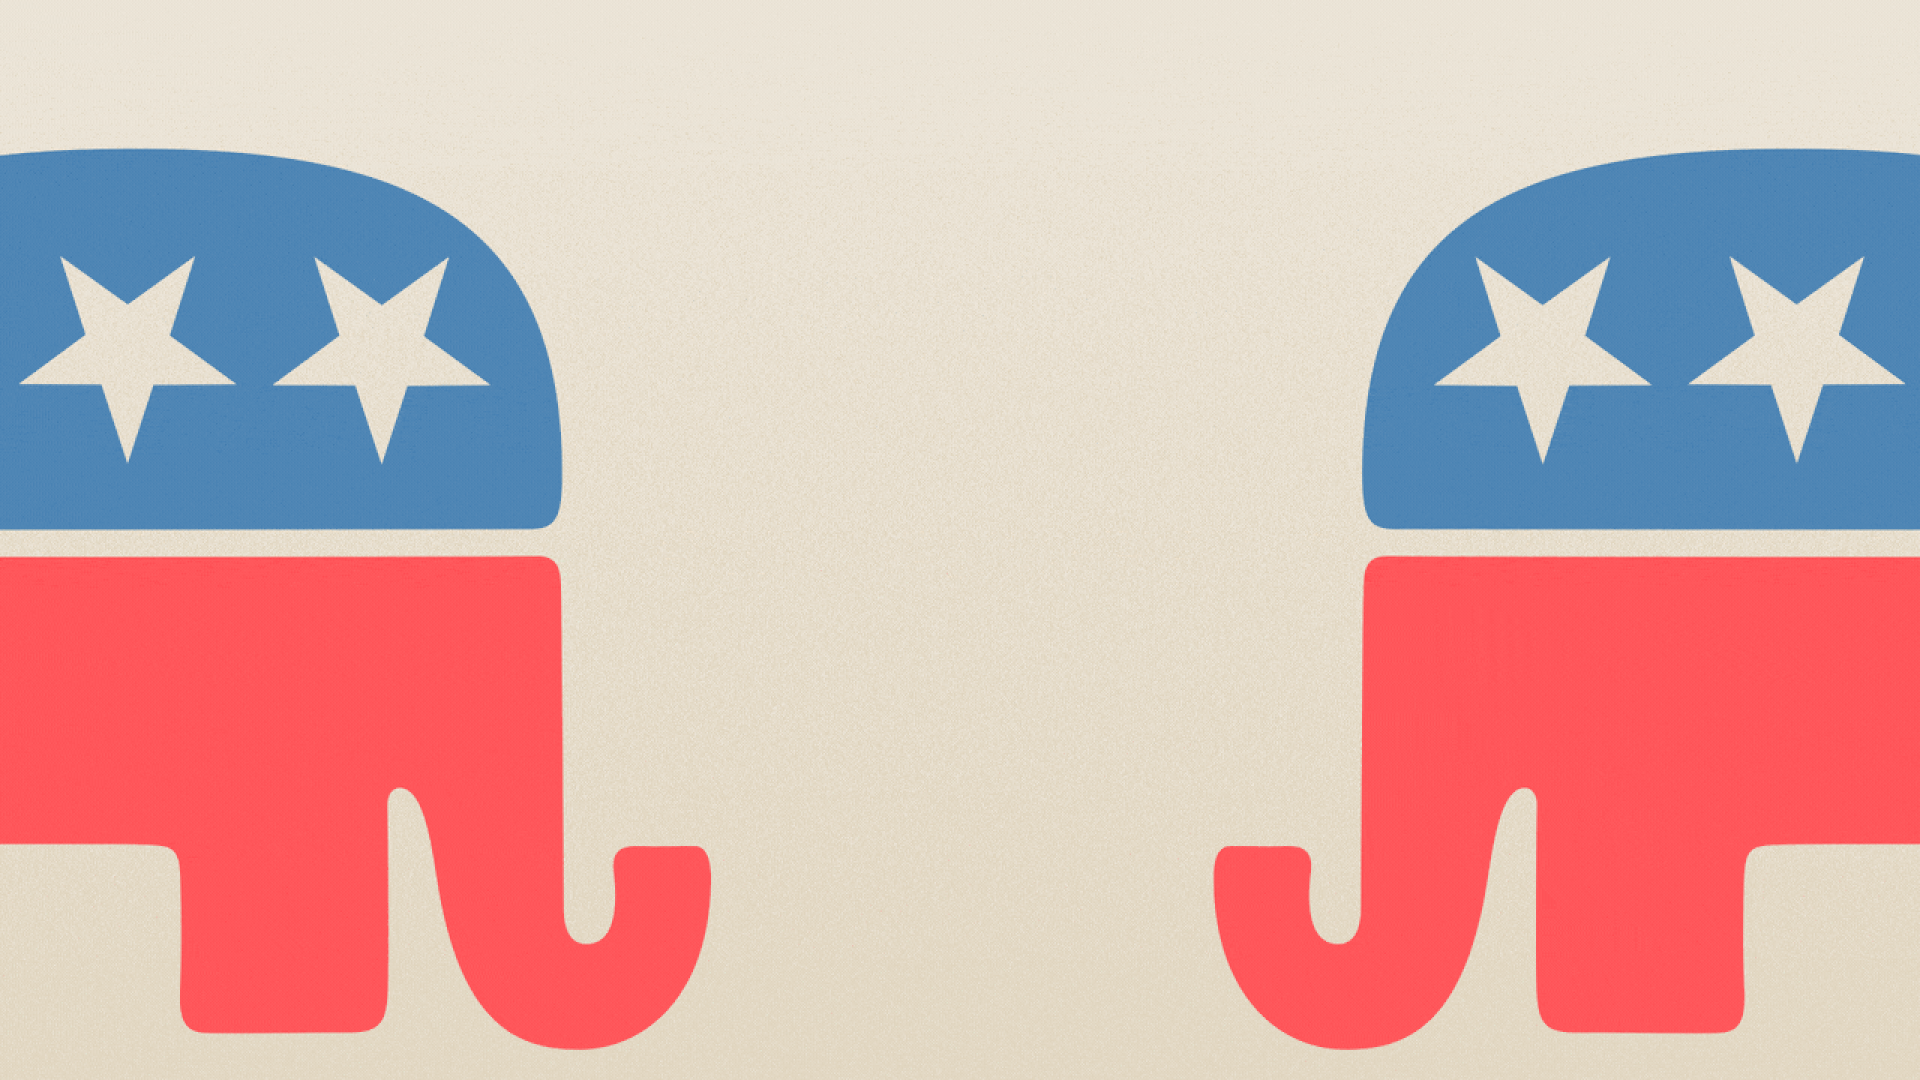 Illustration of two Republican elephant logos butting heads, with the one on the right getting smaller after every impact.